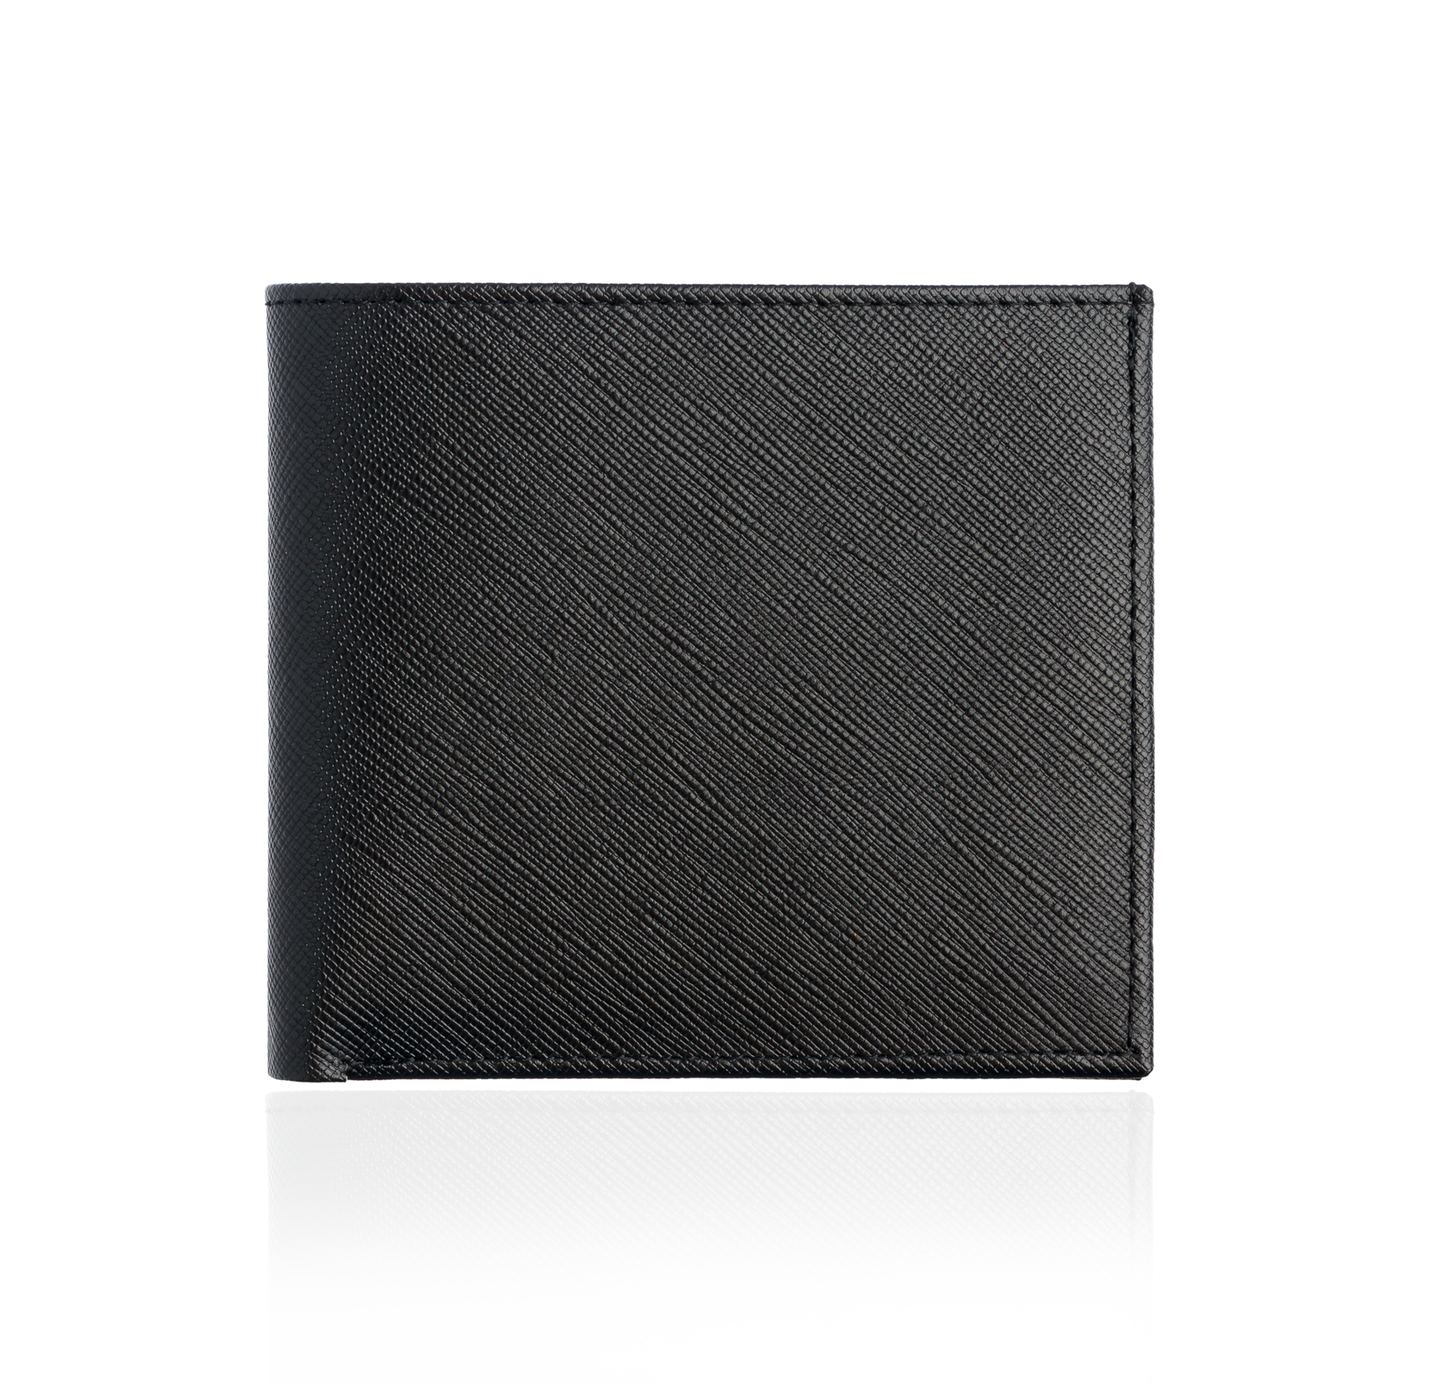 Black Textured Leather Wallet with Black Interior